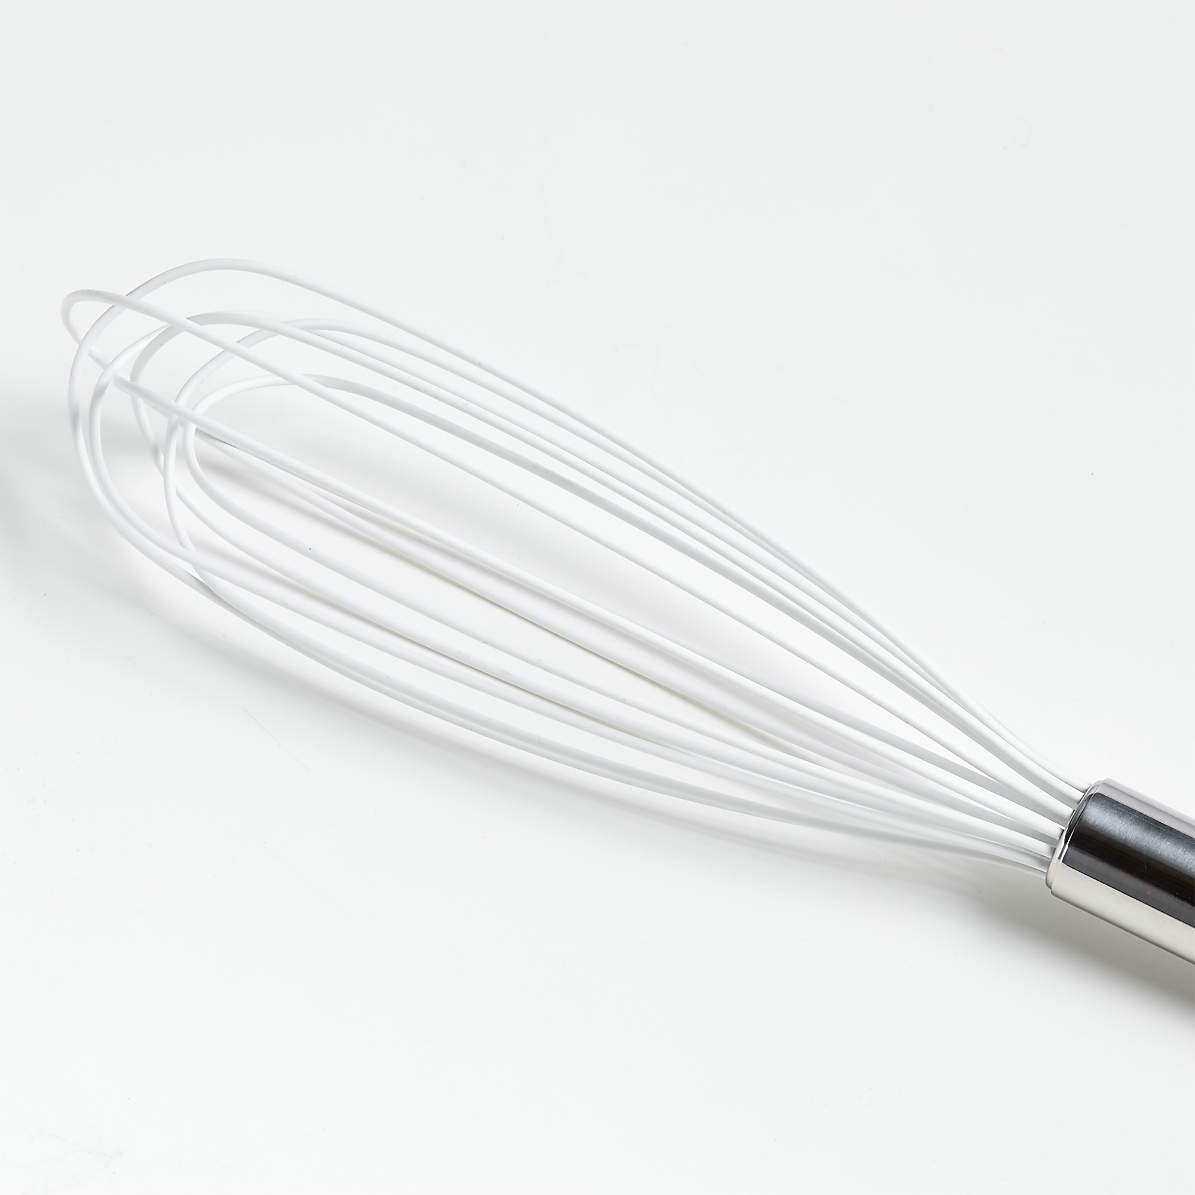 Crate & Barrel Wood and Mint 12 Silicone Whisk + Reviews